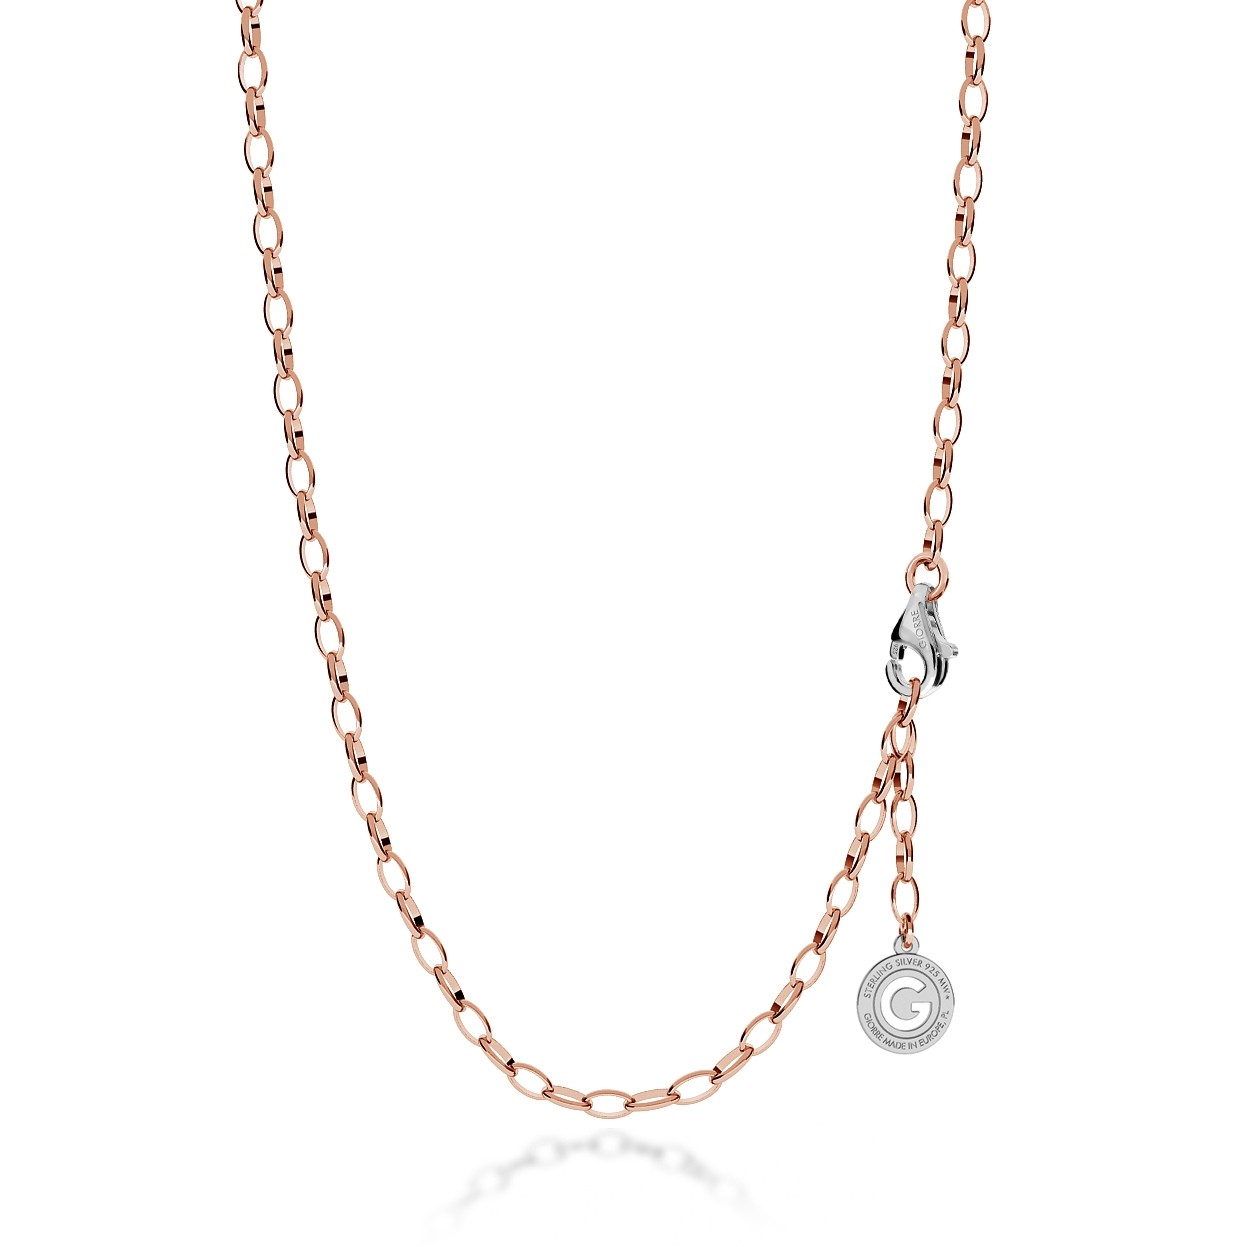 STERLING SILVER NECKLACE 55-65 CM PINK GOLD, LIGHT RHODIUM CLASP, LINK 6X4 MM